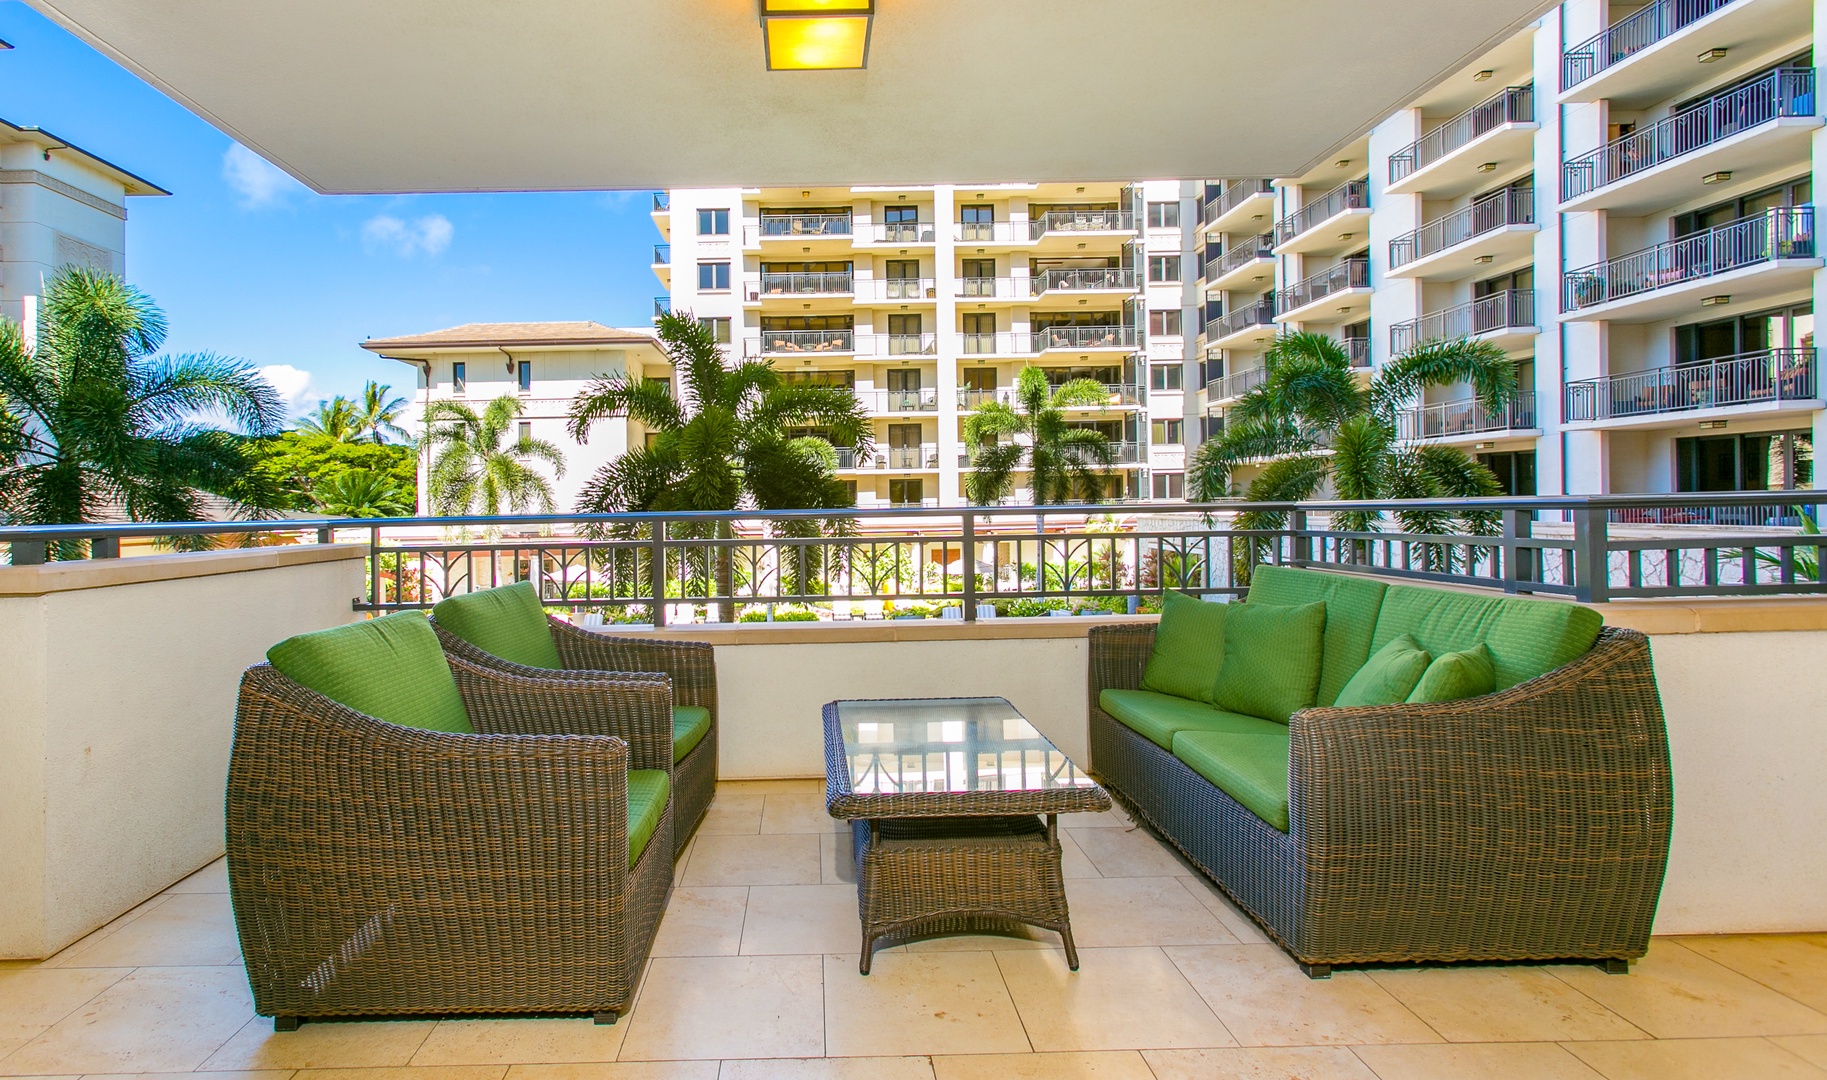 Kapolei Vacation Rentals, Ko Olina Beach Villas O224 - Another incredible view of the lanai surrounded by swaying palm trees.